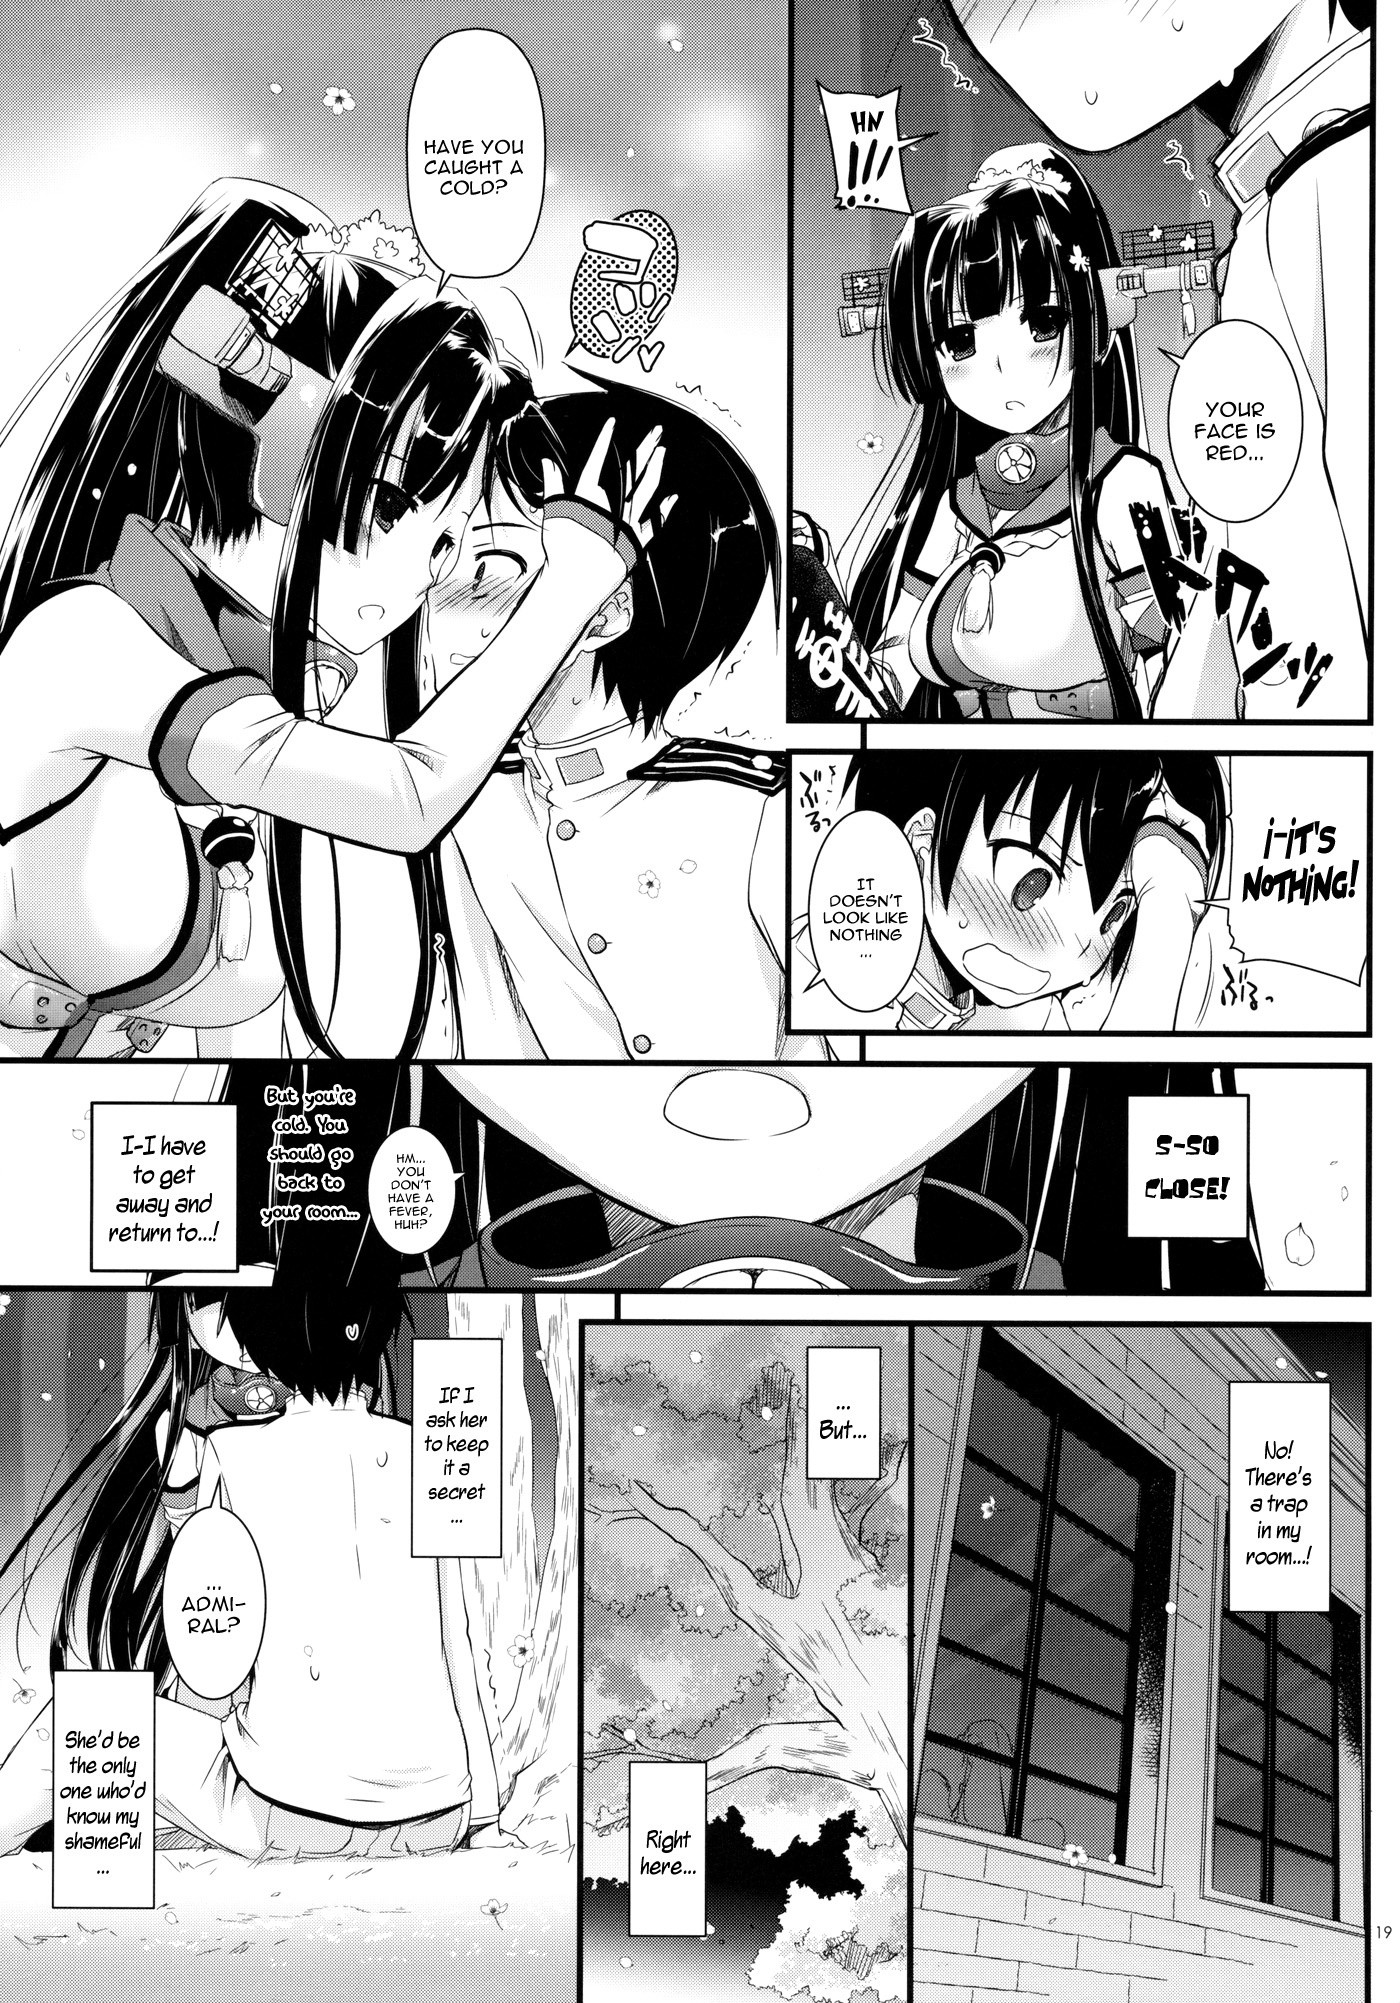 D.L. action 85 hentai manga picture 18